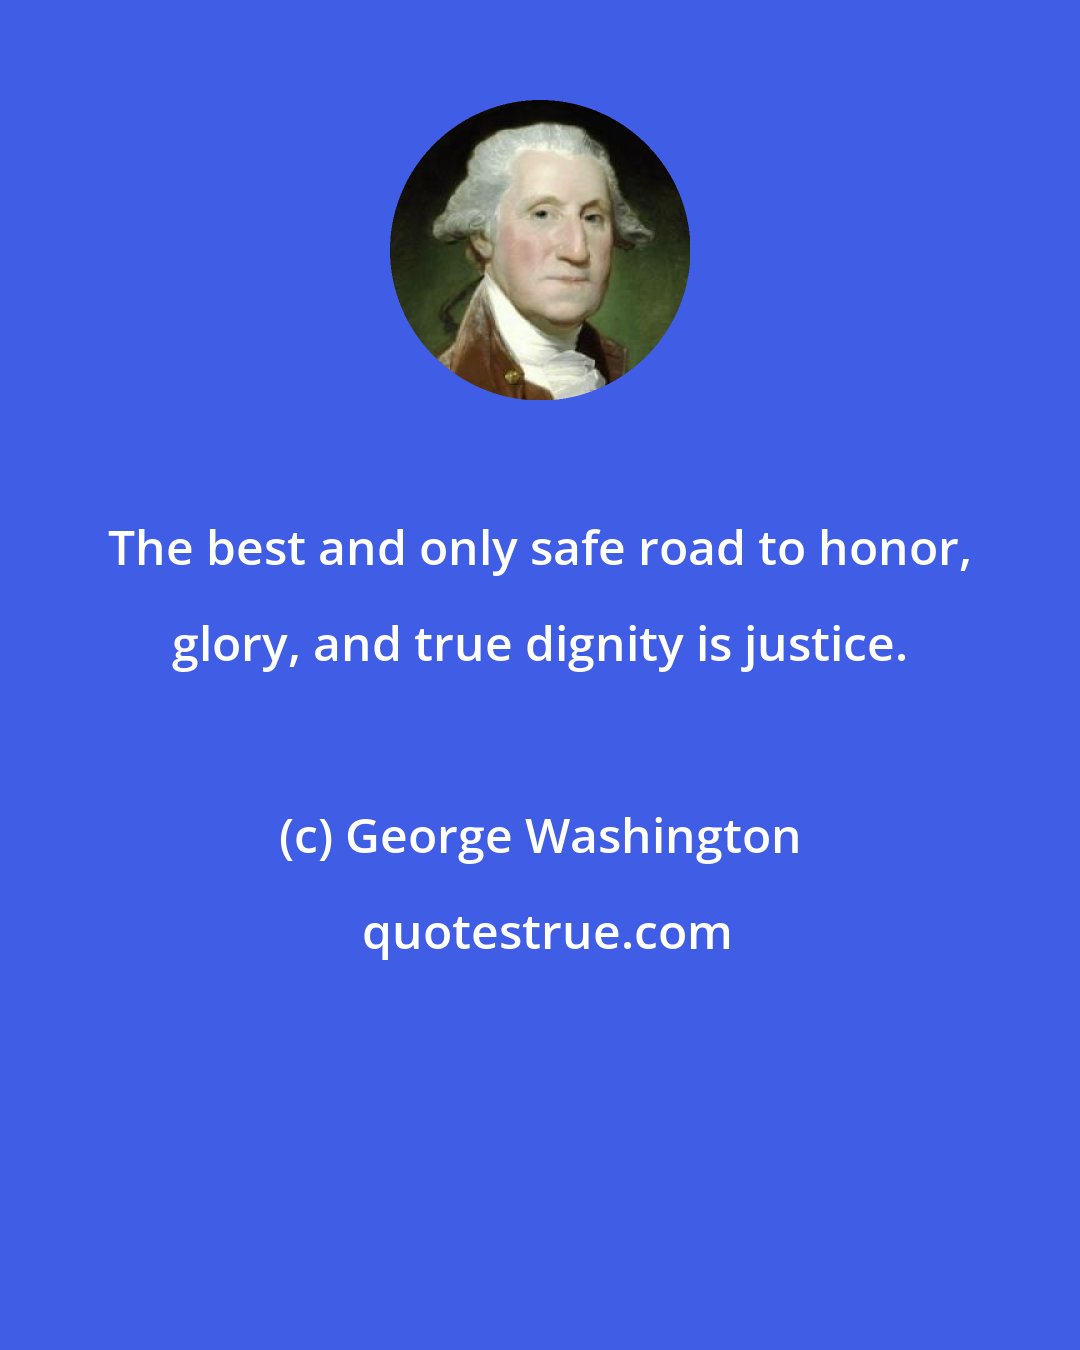 George Washington: The best and only safe road to honor, glory, and true dignity is justice.